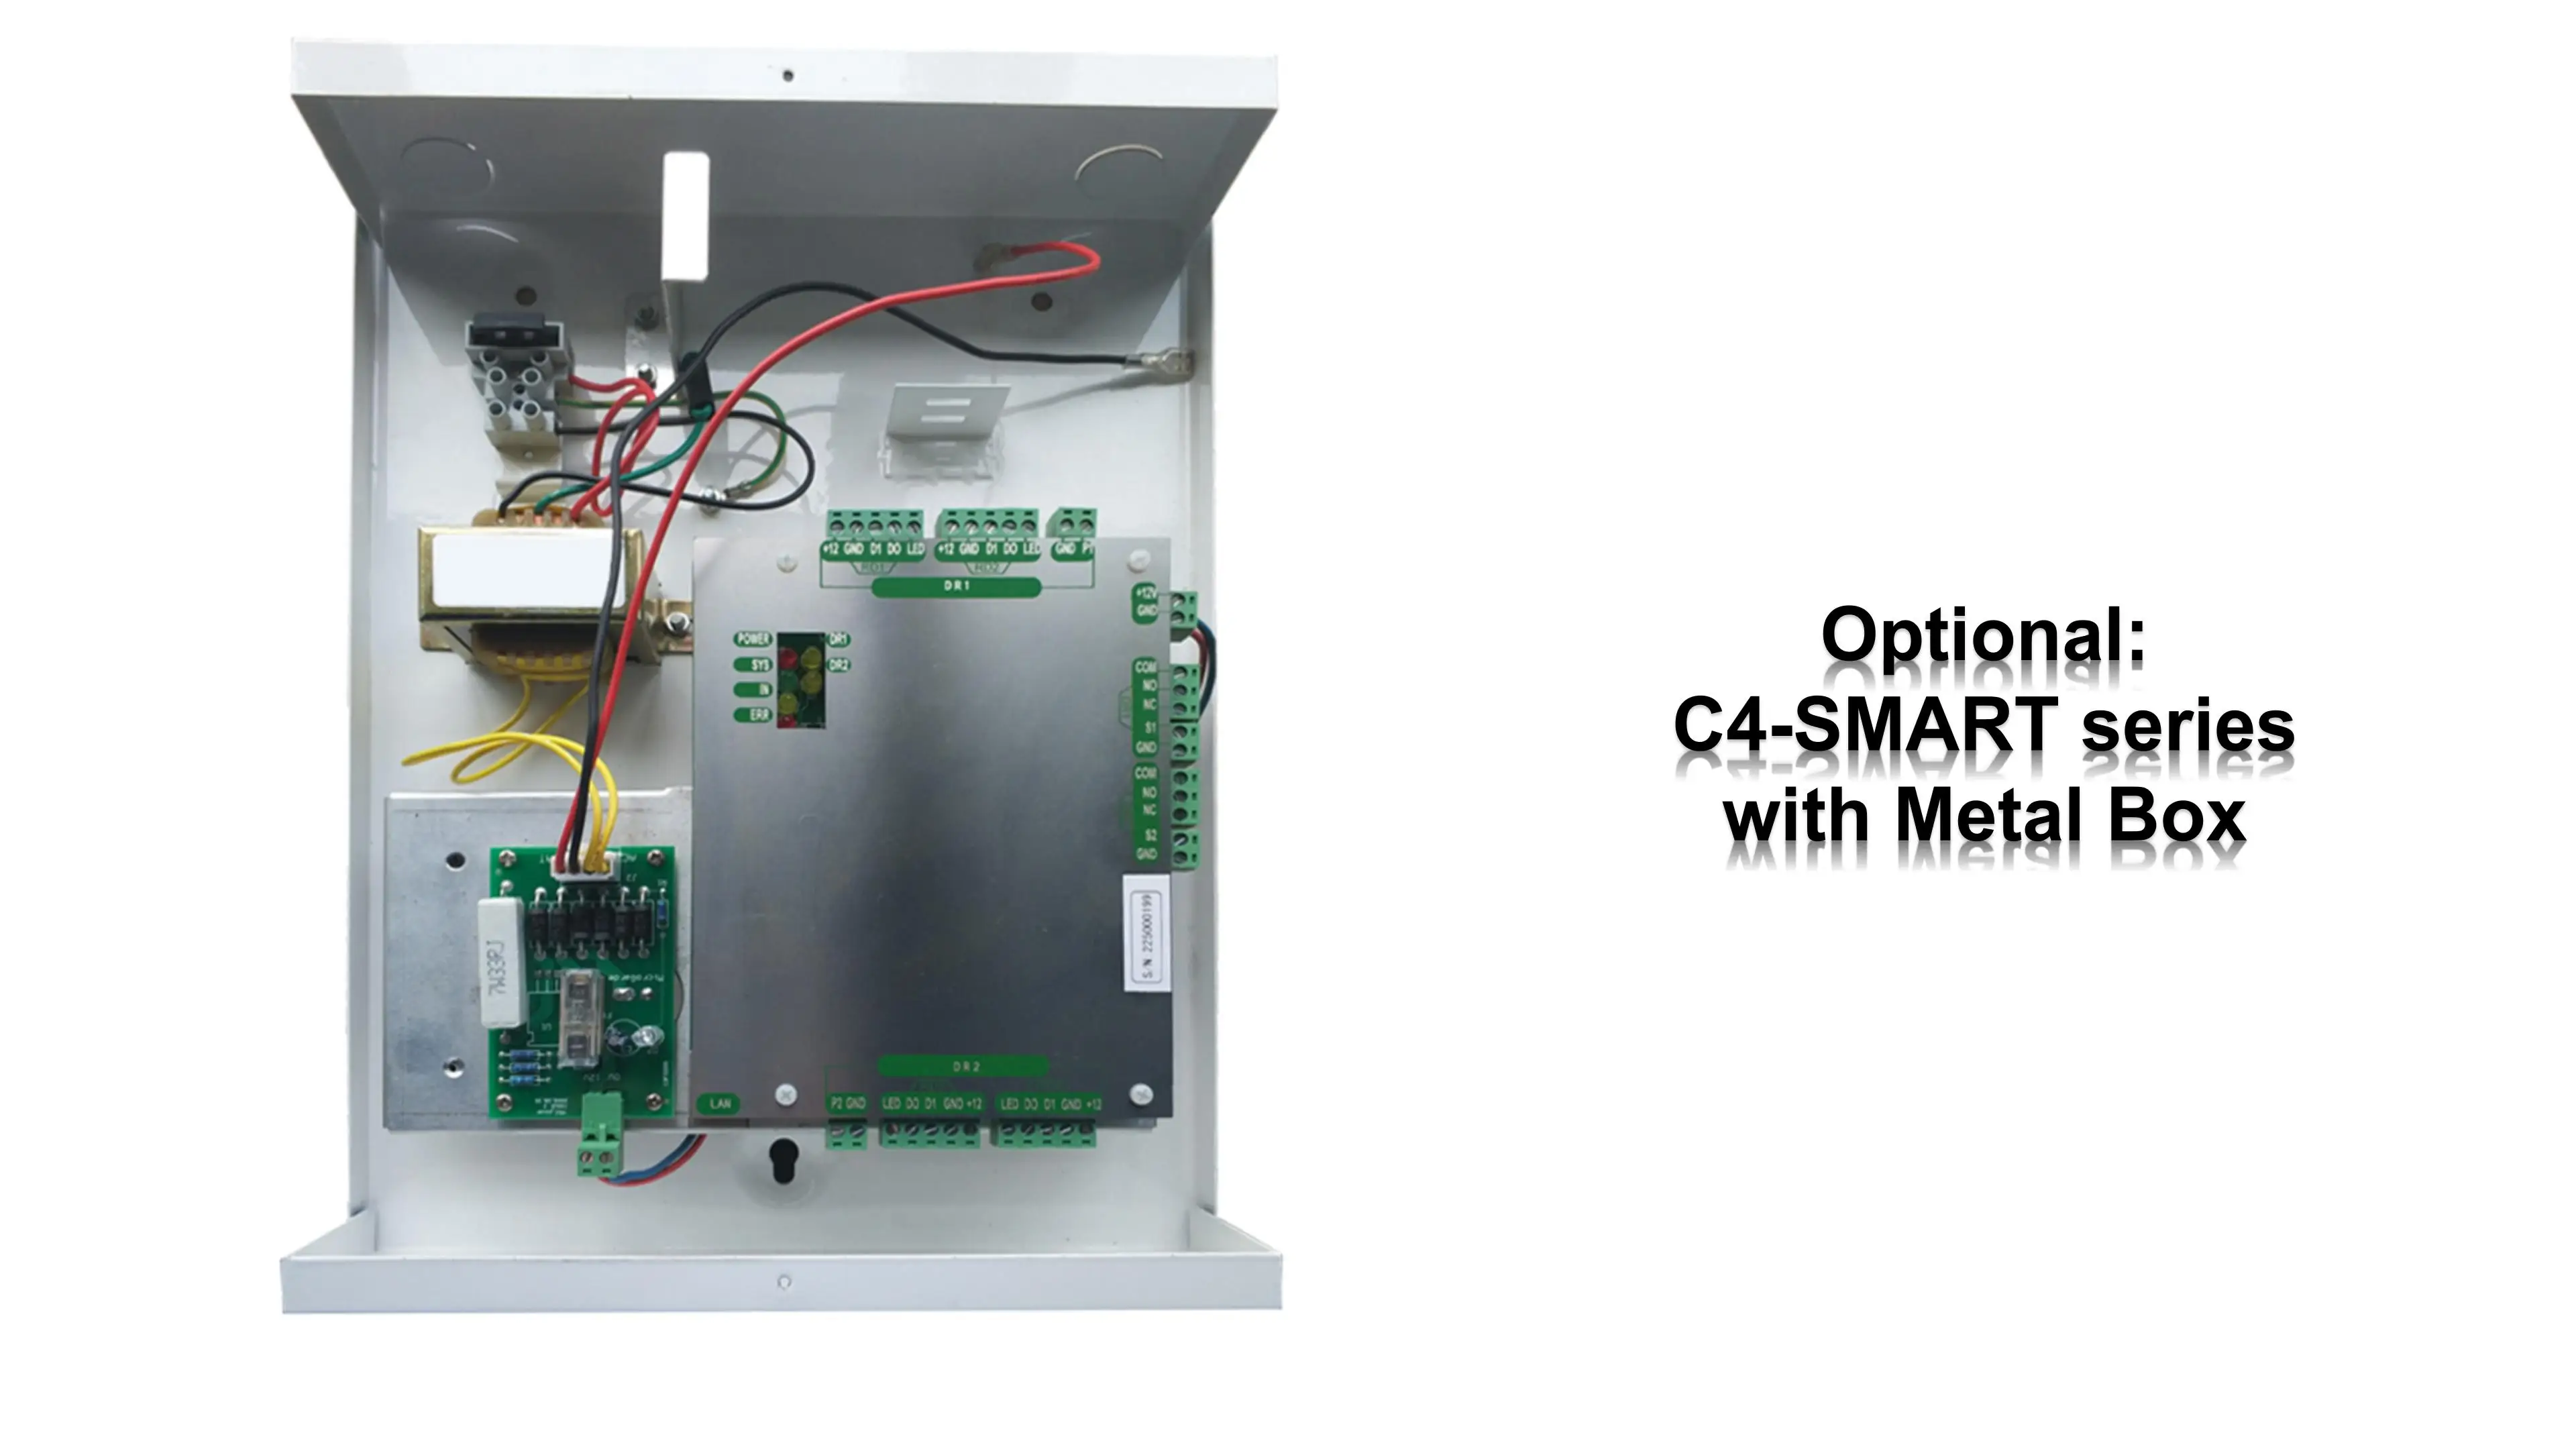 Four Doors Access Control Board and Dual Relay Access Control System with TCP/IP Network（C4-SMART）